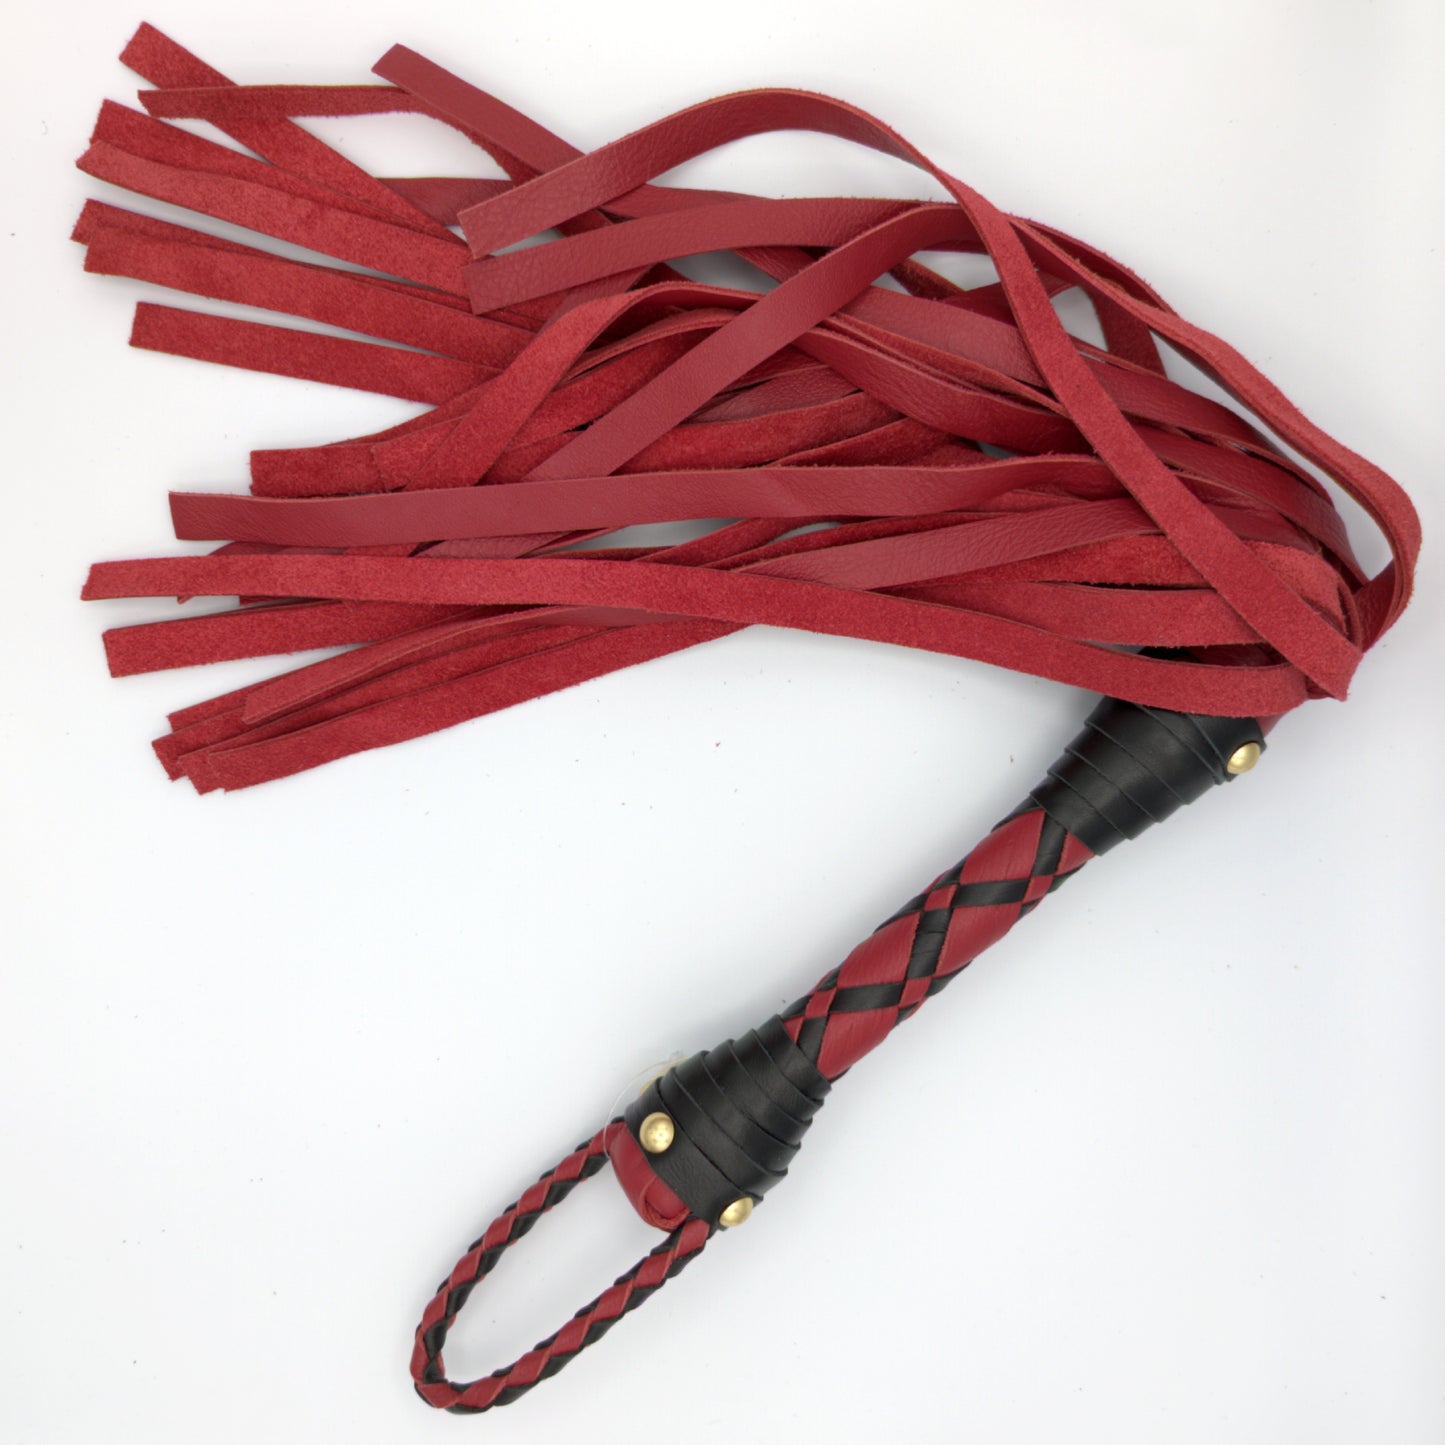 Built to Order Custom Leather Cowhide Flogger